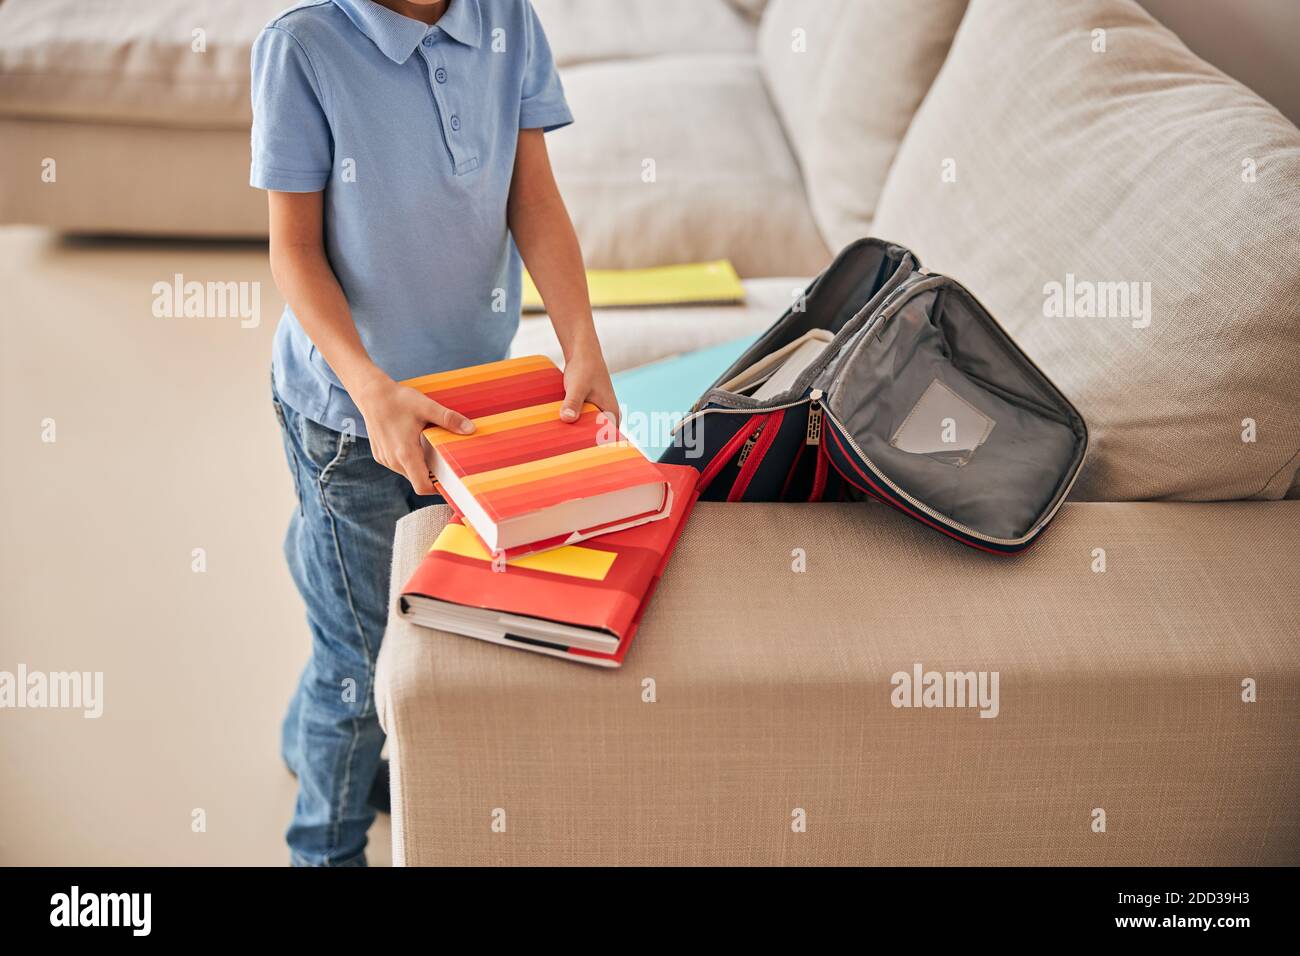 Unrecognisable boy taking books out of a school-bag Stock Photo